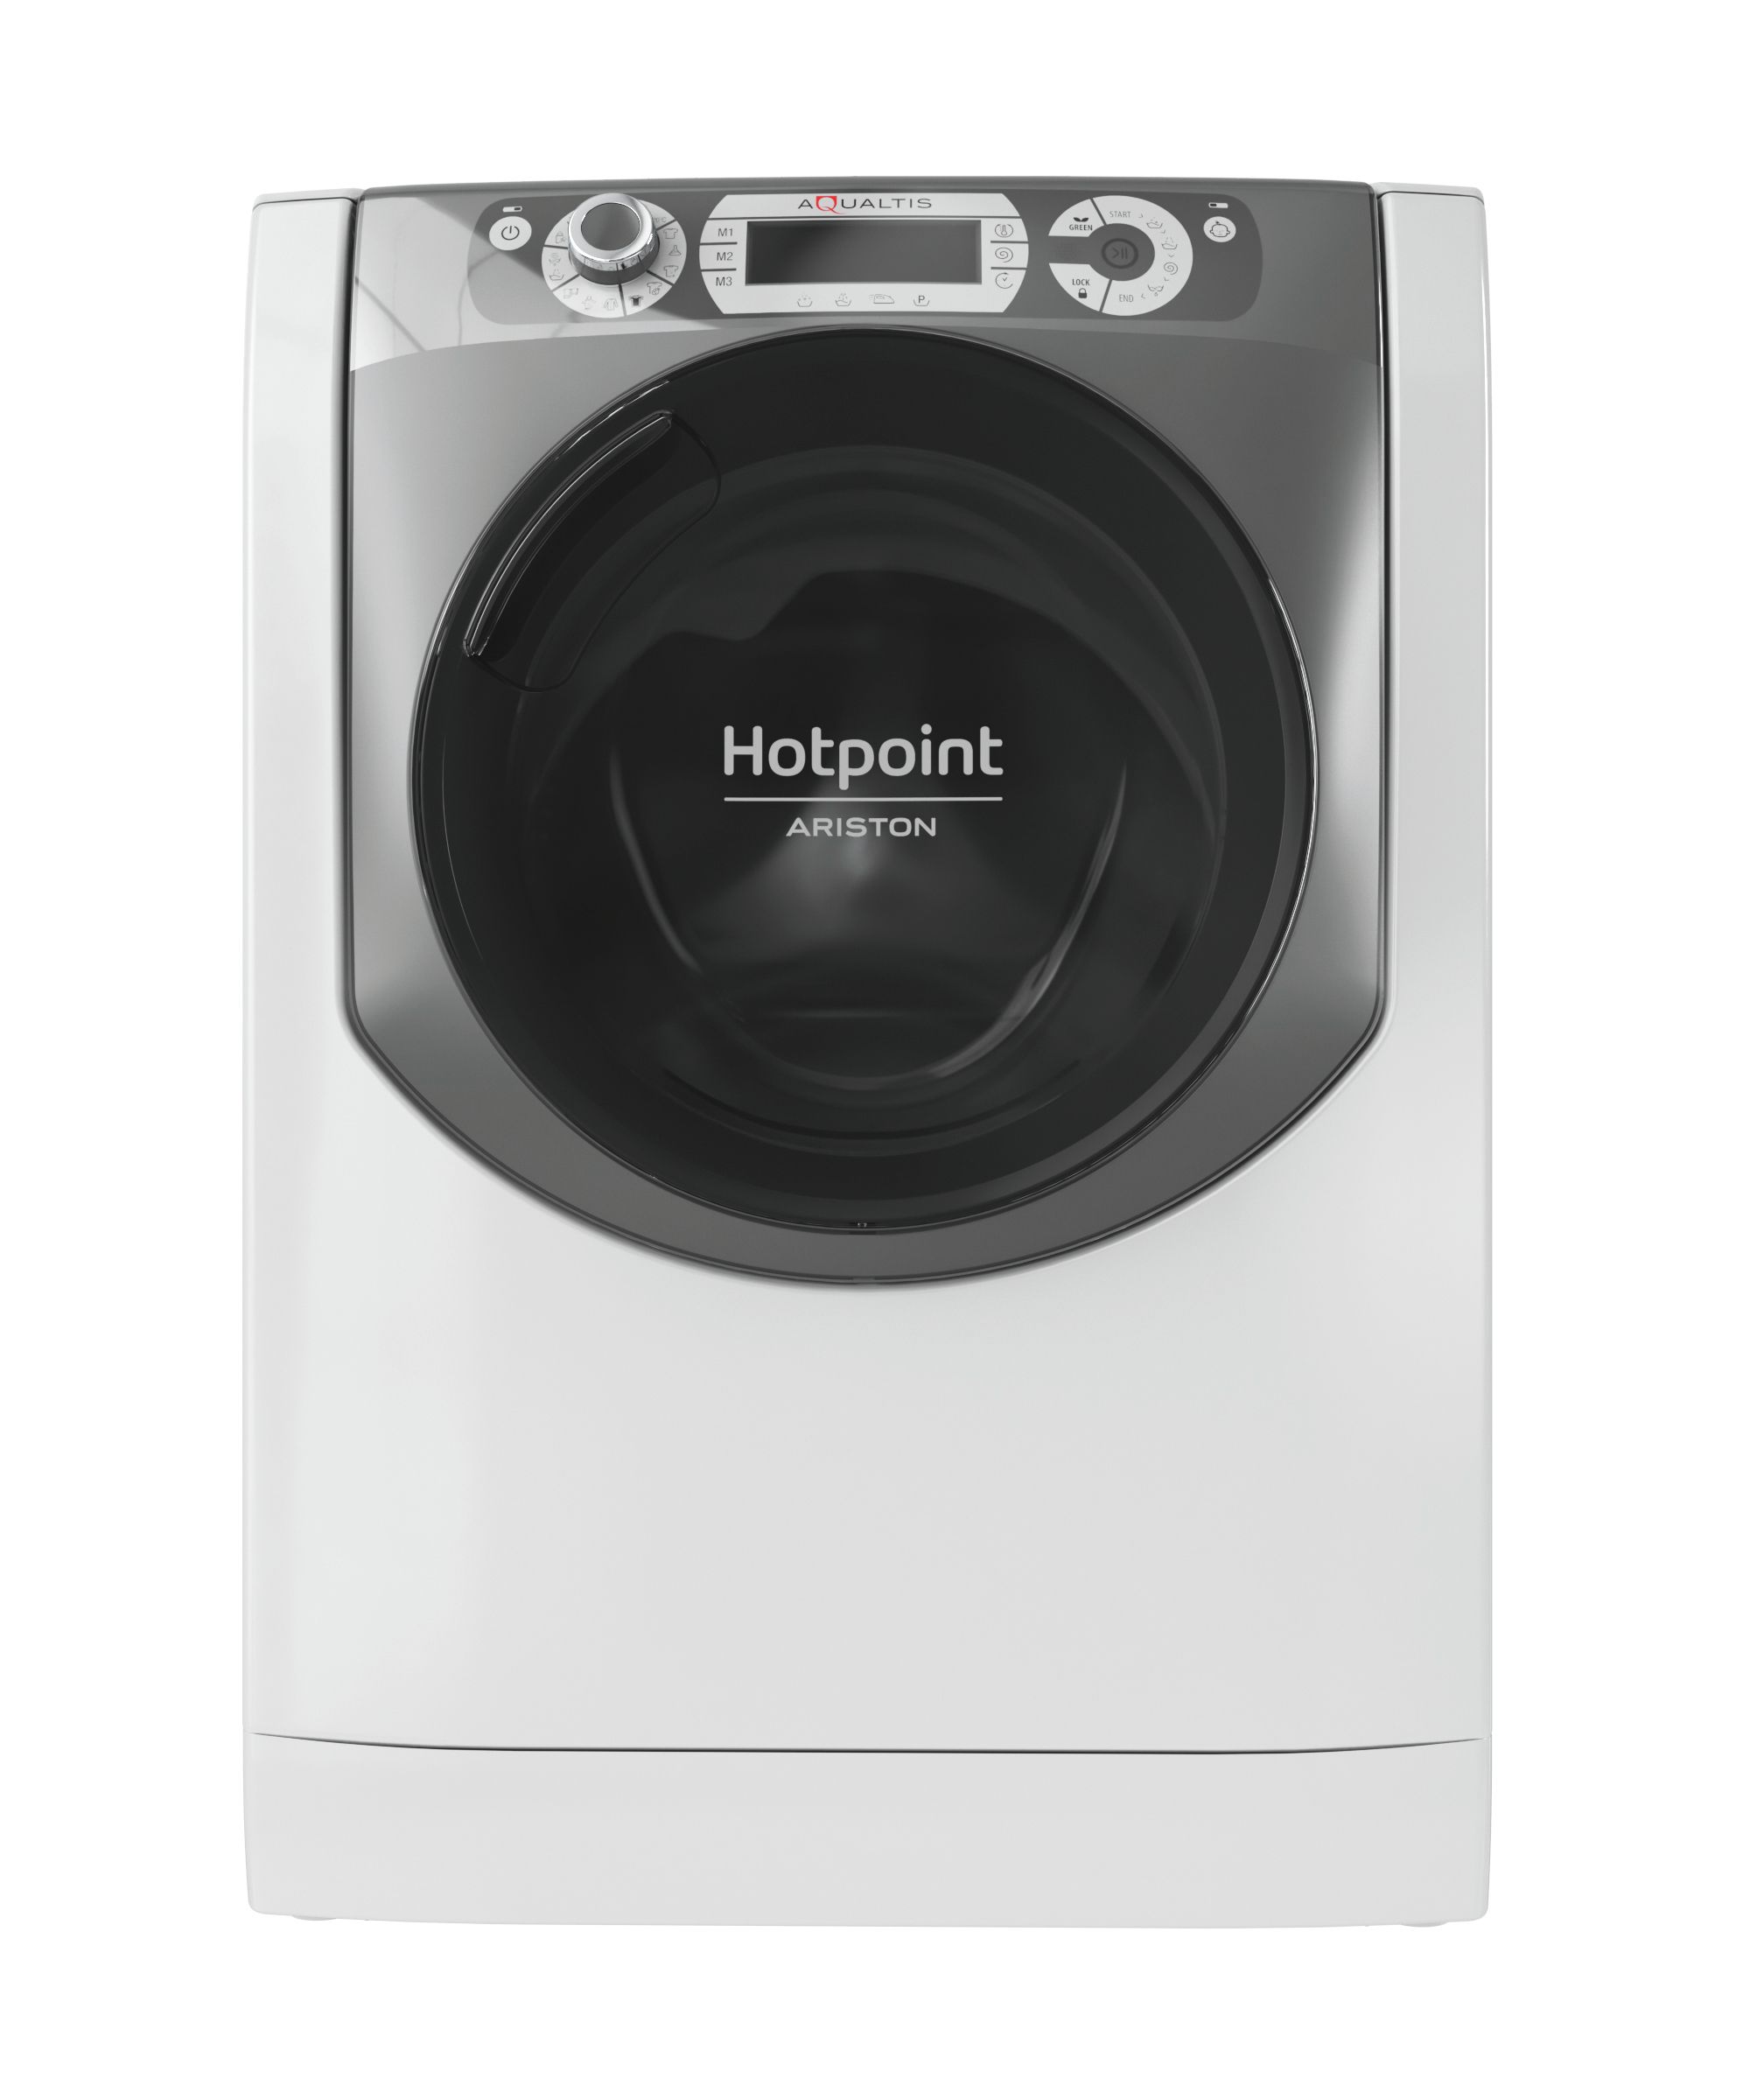 Image of Hotpoint AQSD723 EU/A N lavatrice Caricamento frontale 7 kg 1200 Giri/min D Argento, Bianco